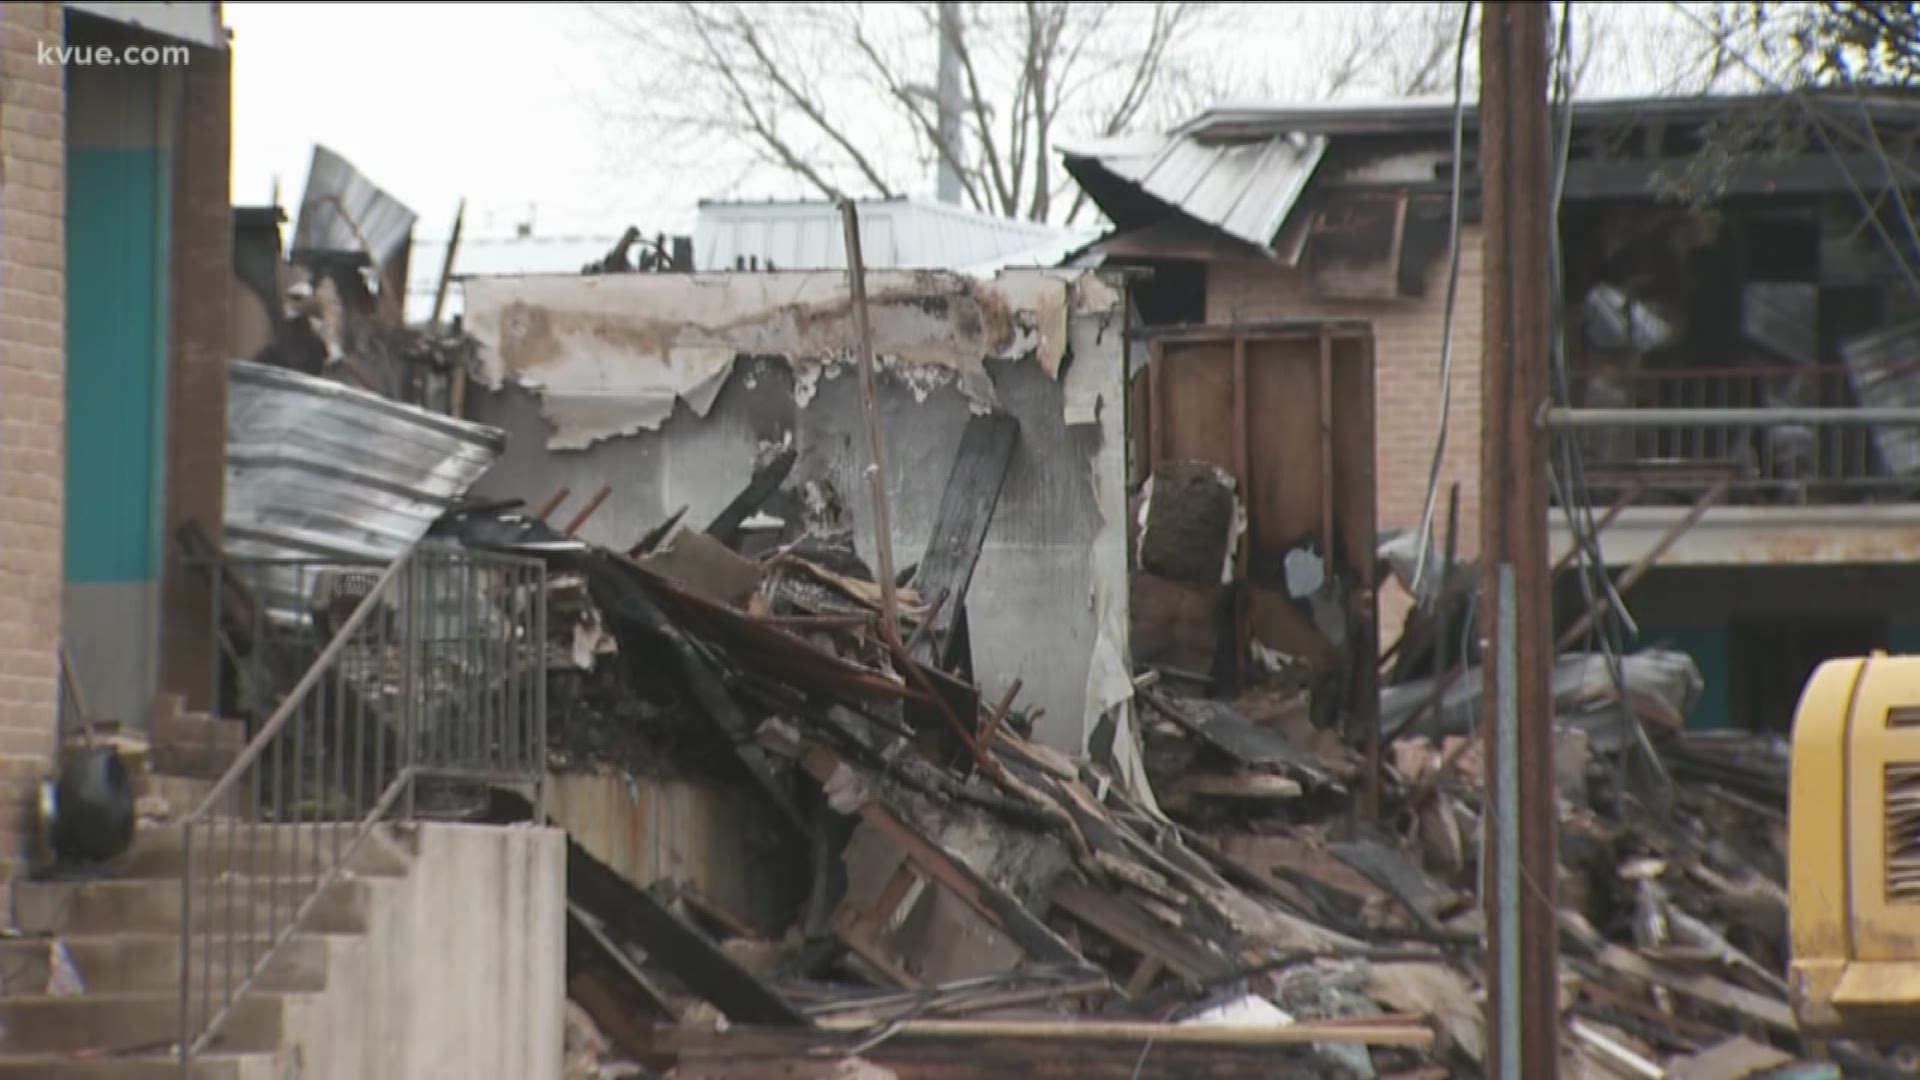 Nearly six months after a deadly apartment fire in San Marcos that killed five people, the city's zoning board has approved plans to rebuild the damaged apartments.